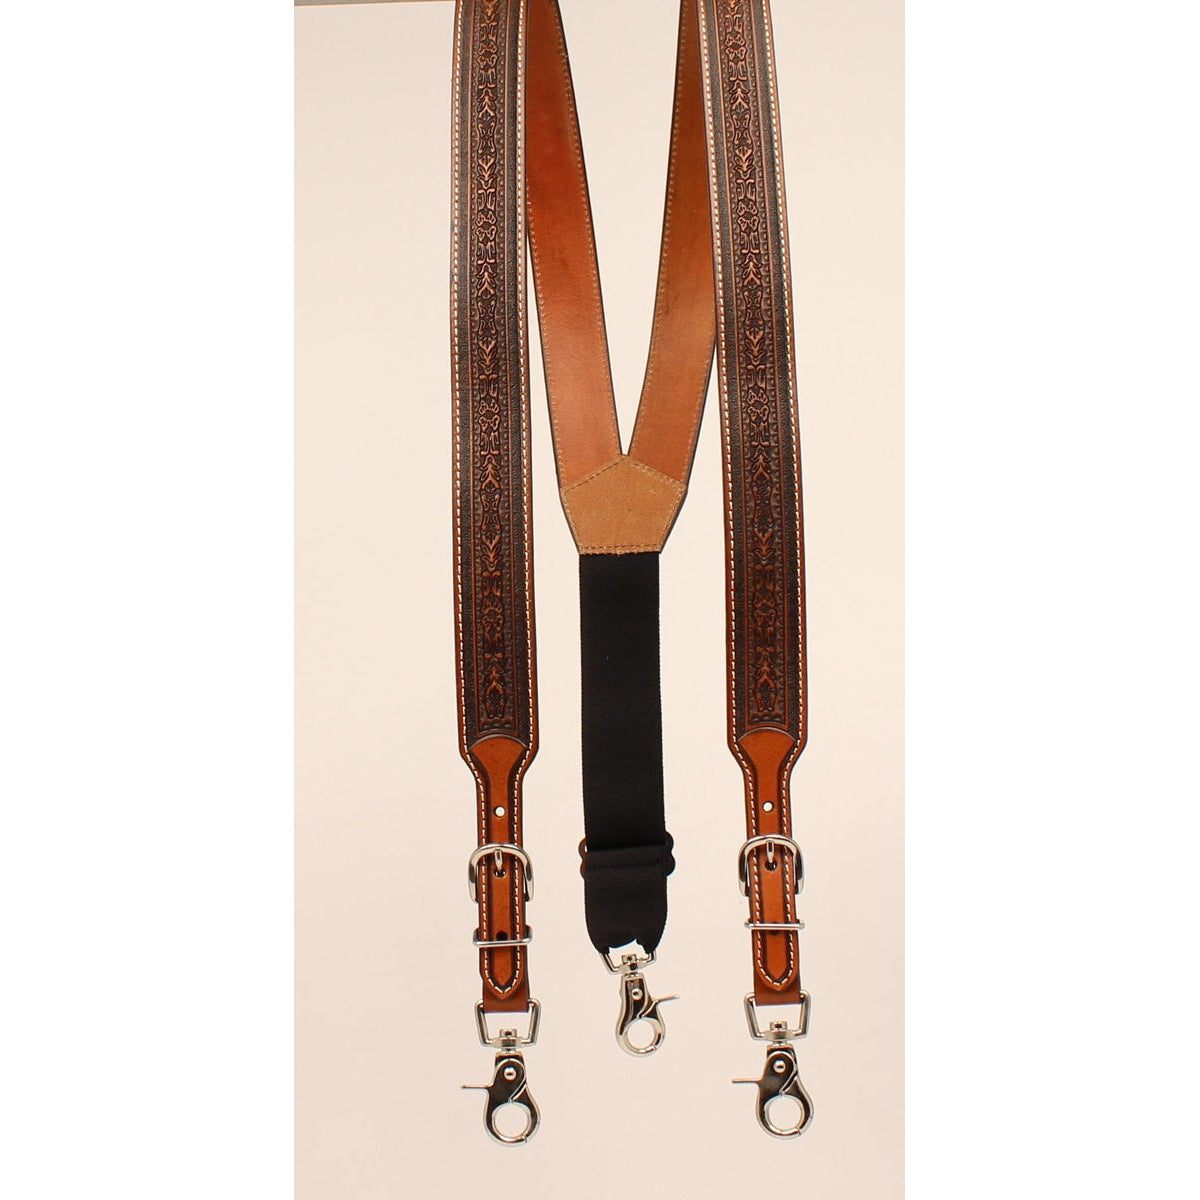 Nocona Men's Tooled Leather Suspenders - Brown w/White Stitch